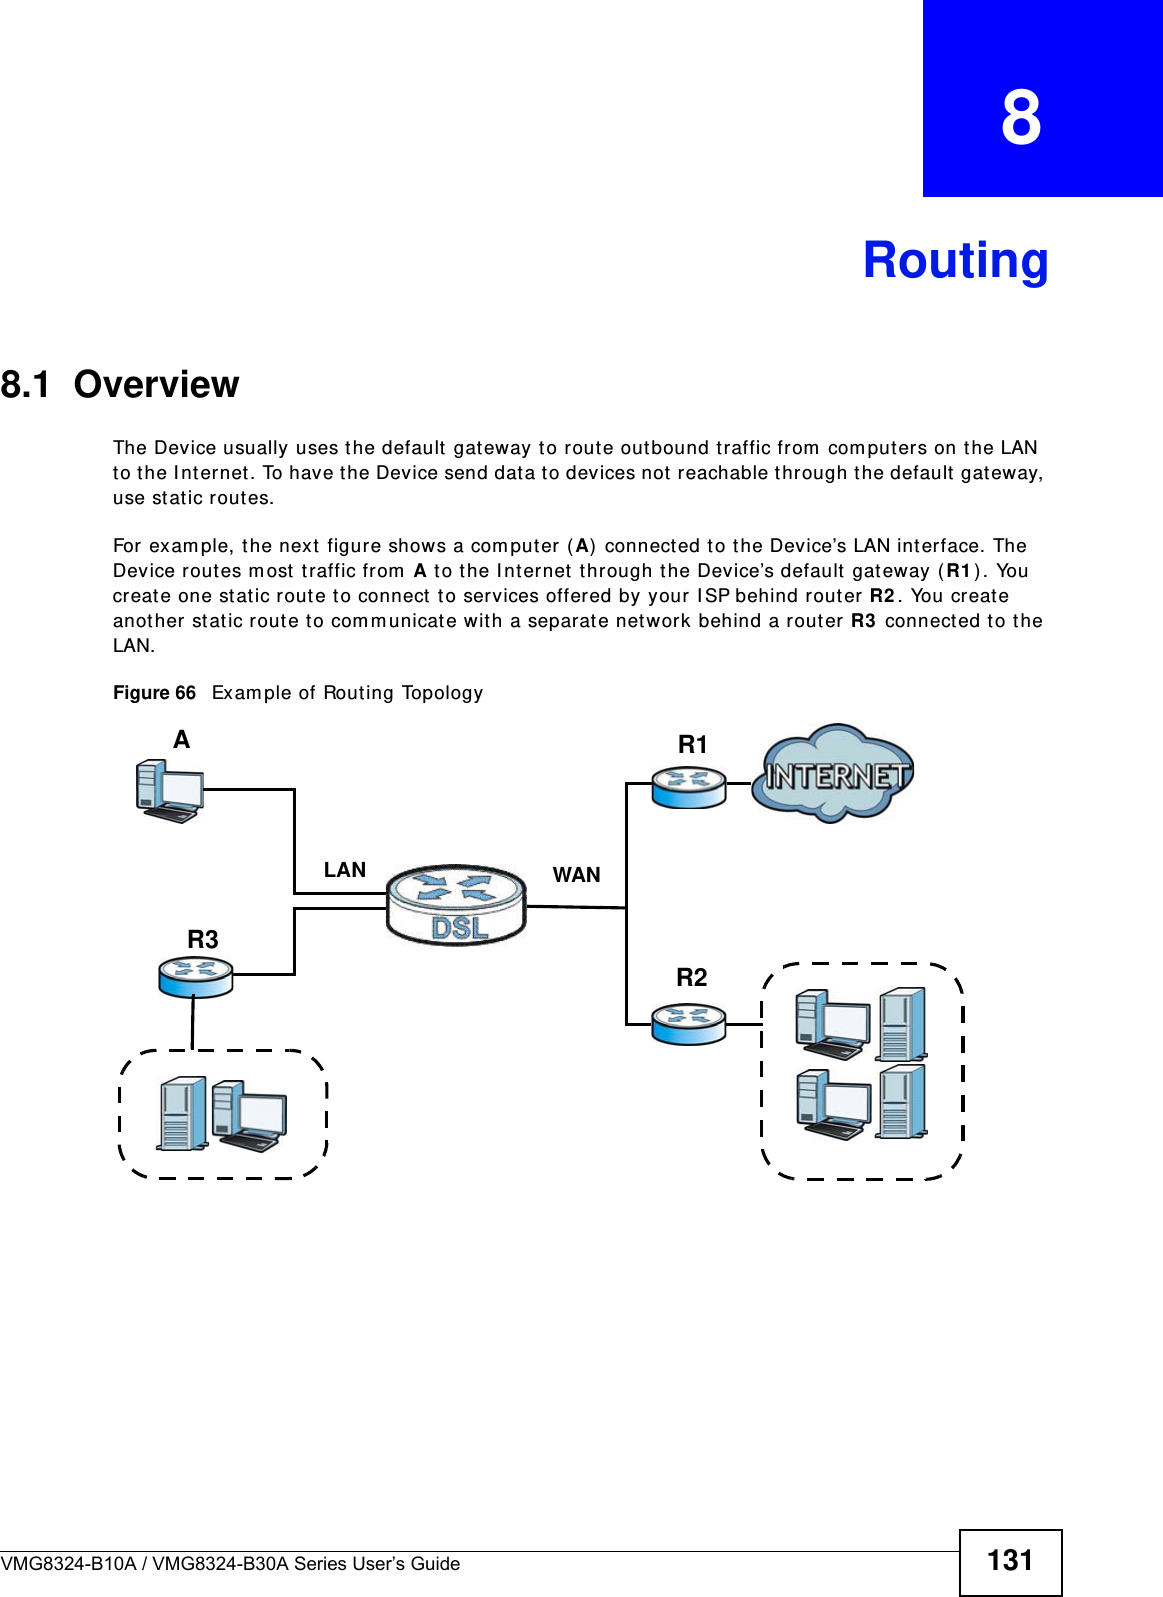 VMG8324-B10A / VMG8324-B30A Series User’s Guide 131CHAPTER   8Routing8.1  Overview The Device usually uses t he default  gat eway t o rout e out bound t raffic from  com puters on t he LAN to the I nt ernet . To have the Device send dat a t o devices not reachable t hrough t he default gat eway, use stat ic routes.For  exam ple, t he next  figure shows a com puter ( A)  connected t o the Device’s LAN int erface. The Device rout es m ost t raffic from  A to the I nt ernet  t hrough t he Device’s default  gateway ( R1 ) . You create one st atic route t o connect  t o services offered by your I SP behind rout er R2 . You creat e another static route t o com m unicat e wit h a separate net work behind a rout er R3  connect ed t o the LAN.   Figure 66   Exam ple of Rout ing TopologyWANR1R2AR3LAN